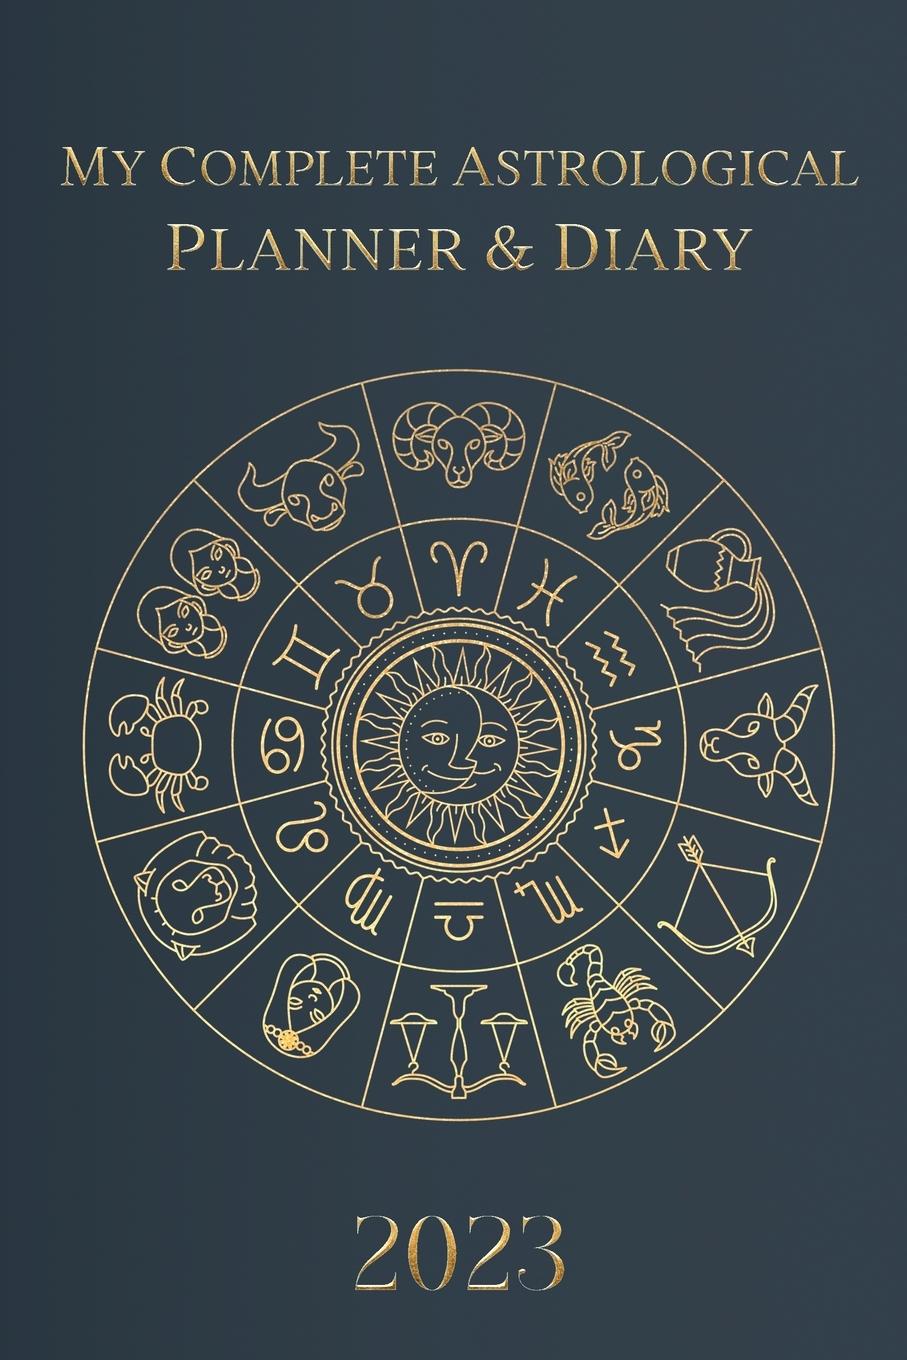 Book My Complete Astrological Planner & Diary 2023 Alexander Viner